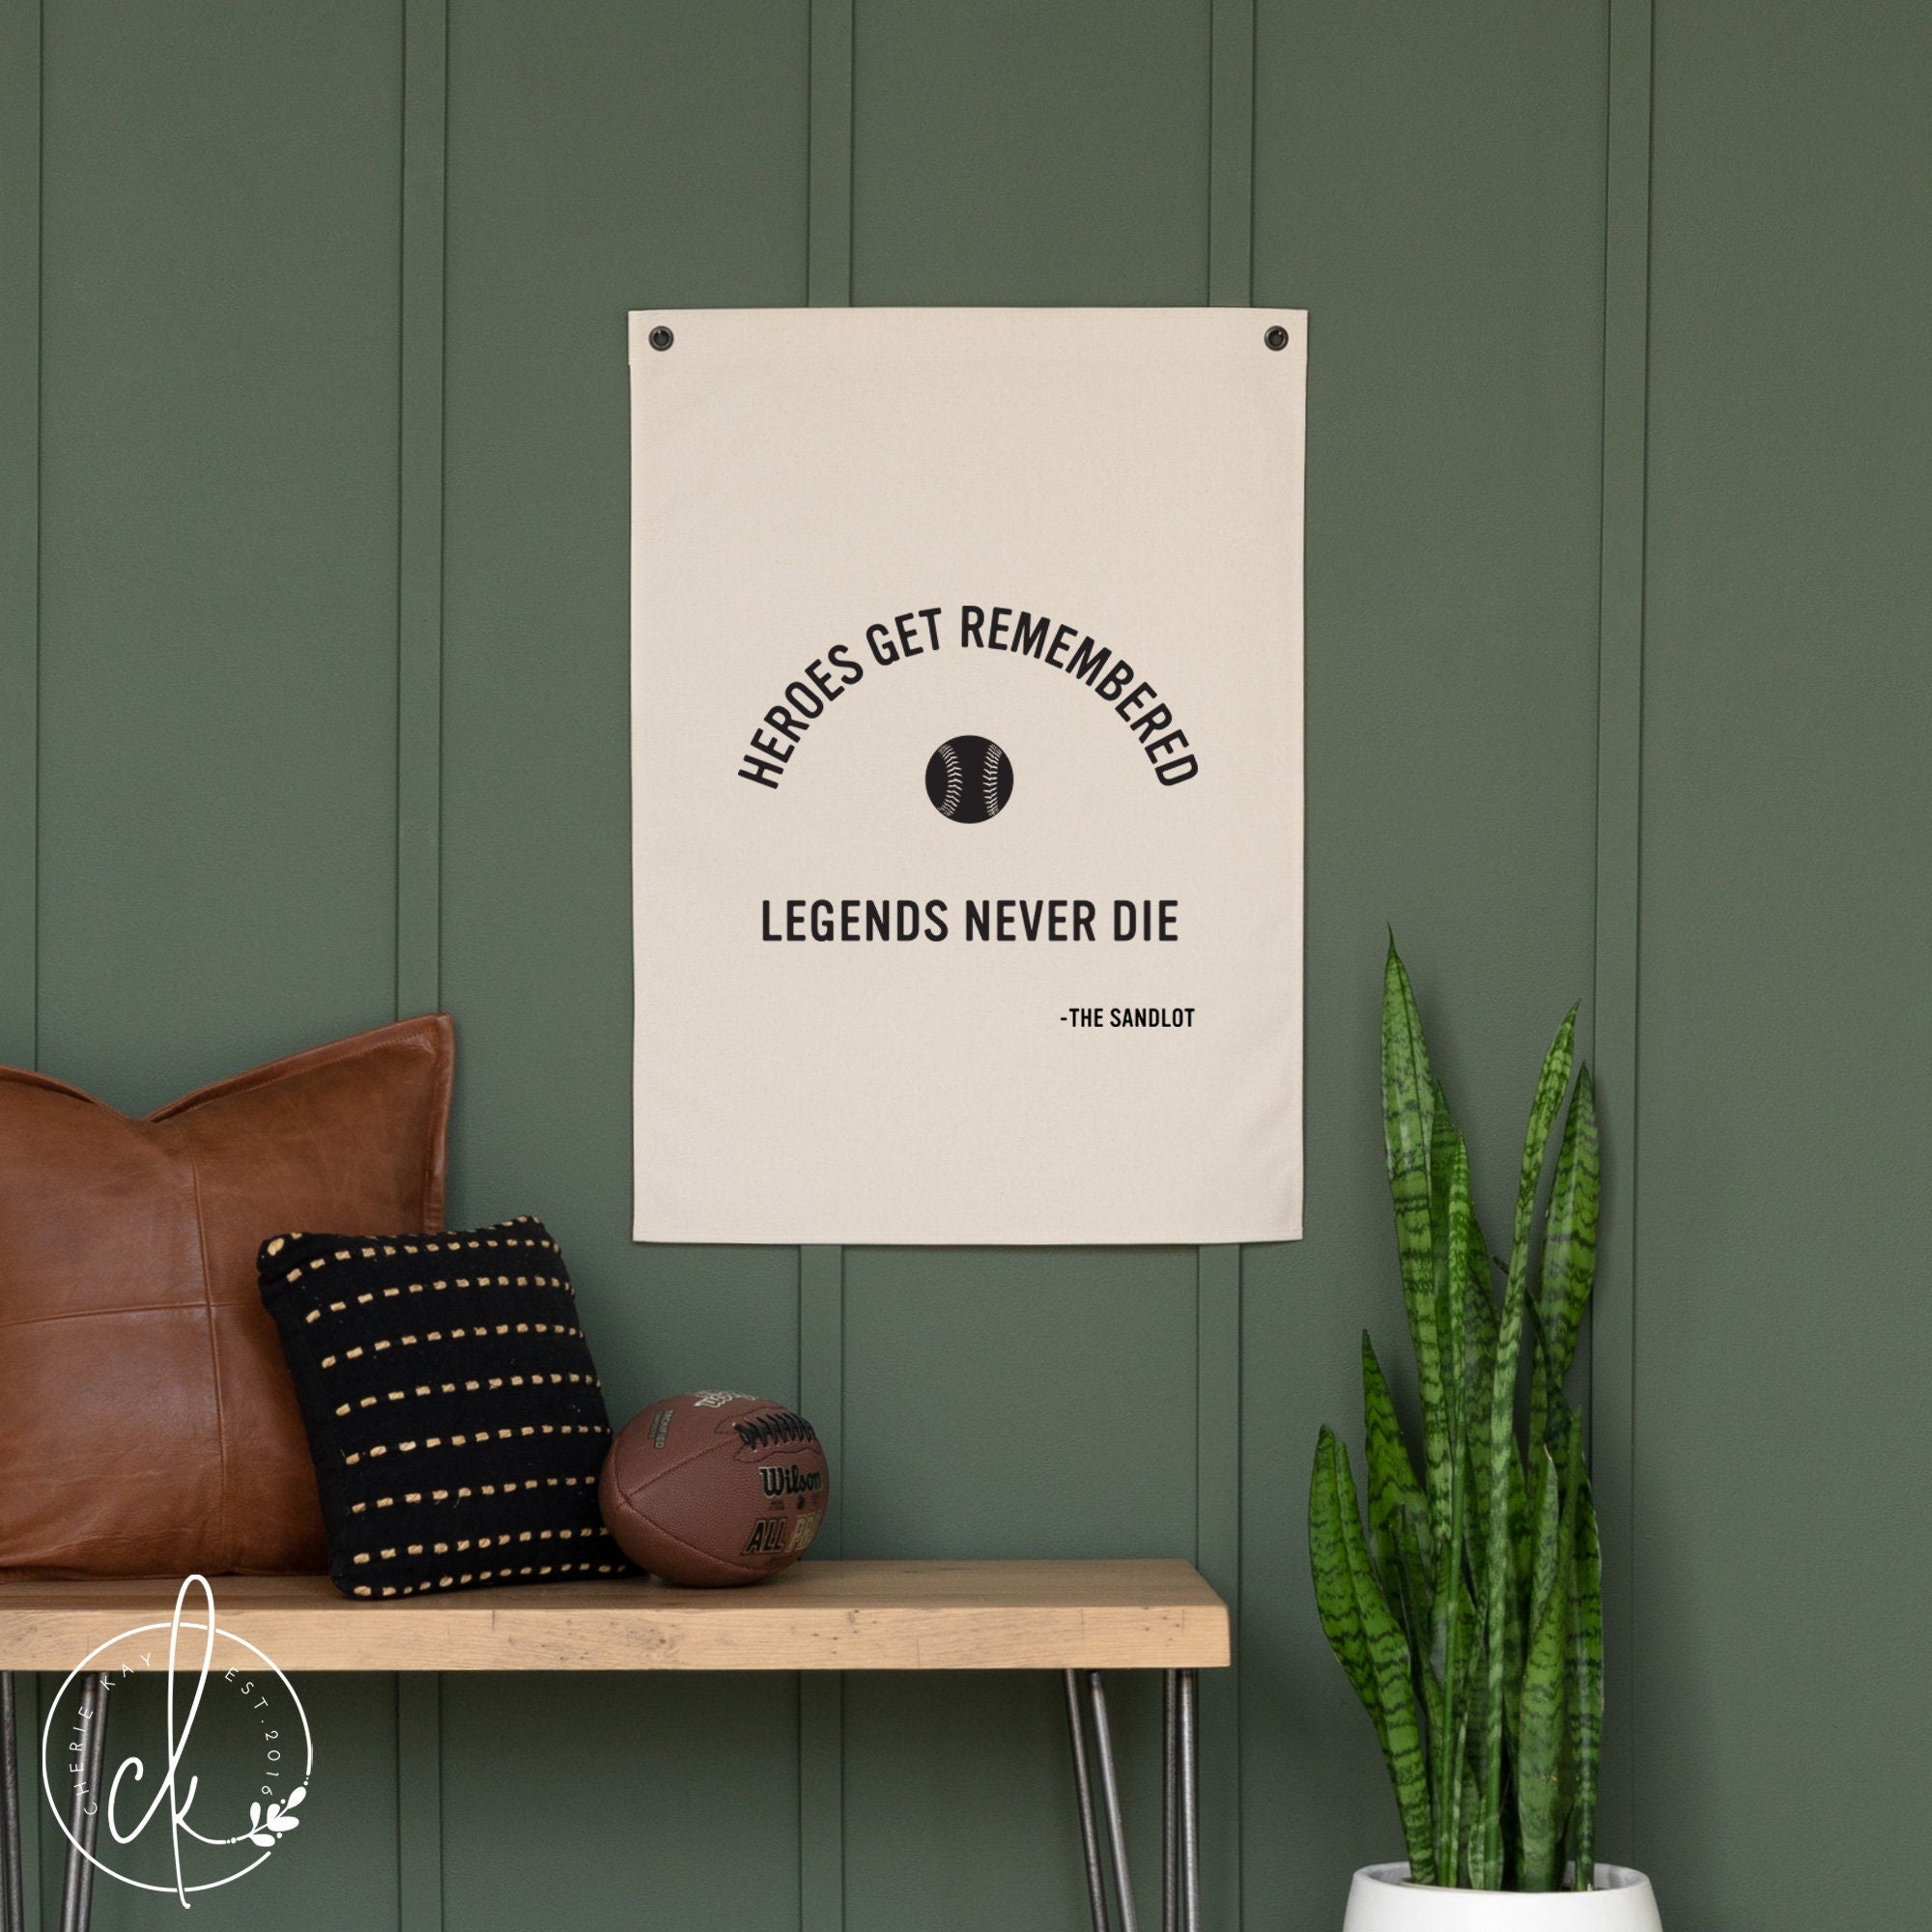 Heroes Get Remembered Legends Never Die | Canvas Banner | Baseball Decor | Boys Room Decor | Kids Room Wall Decor | Sandlot Quote